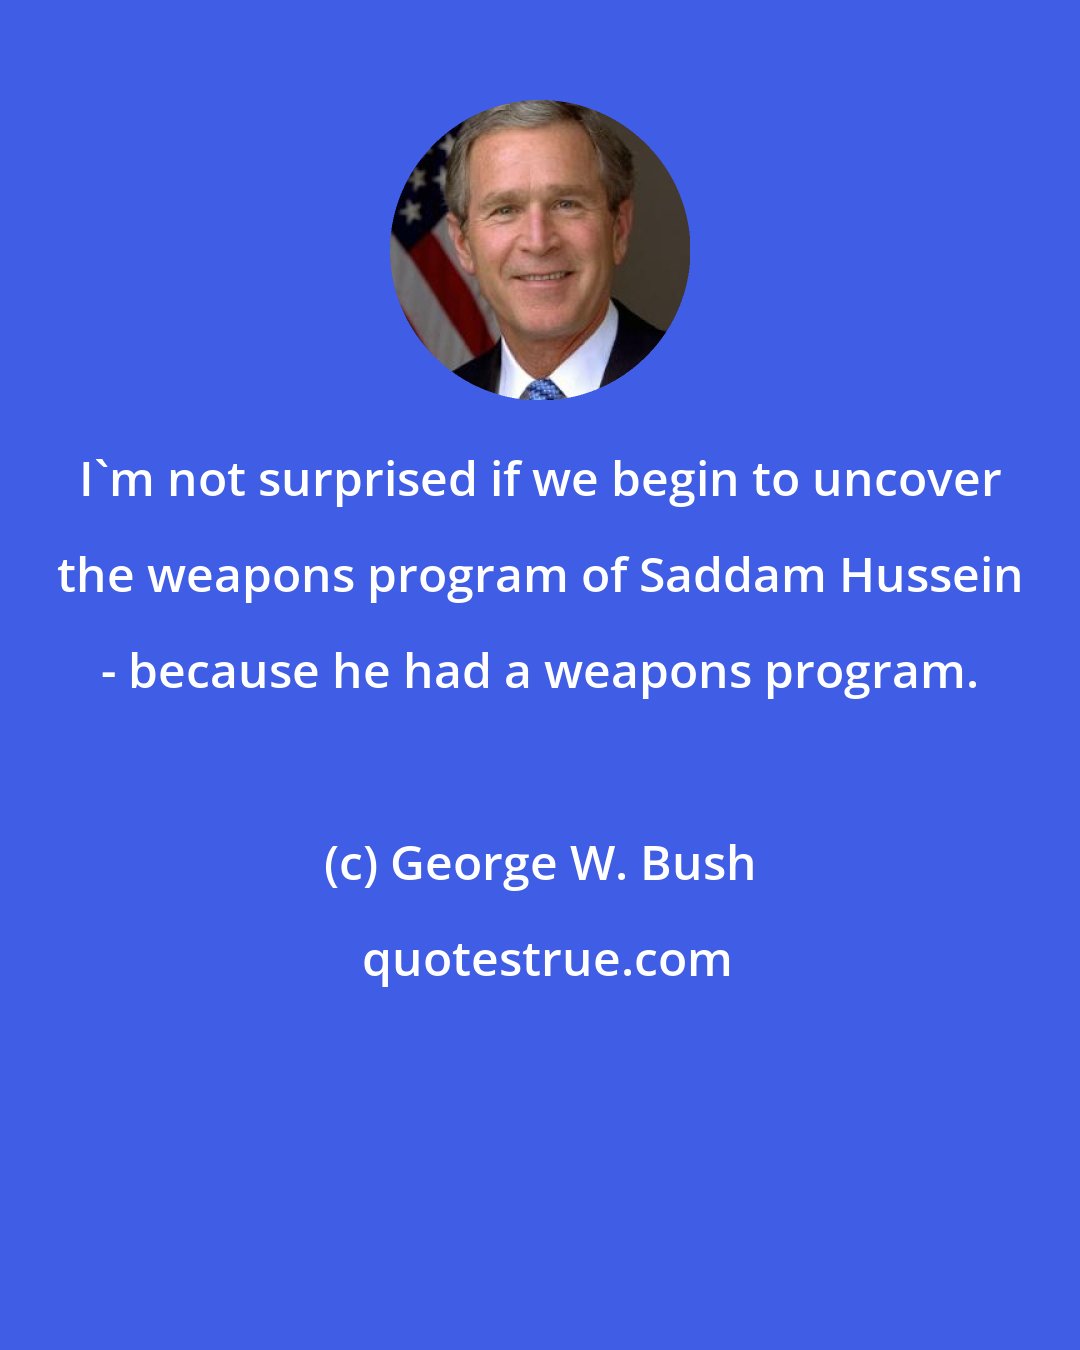 George W. Bush: I'm not surprised if we begin to uncover the weapons program of Saddam Hussein - because he had a weapons program.